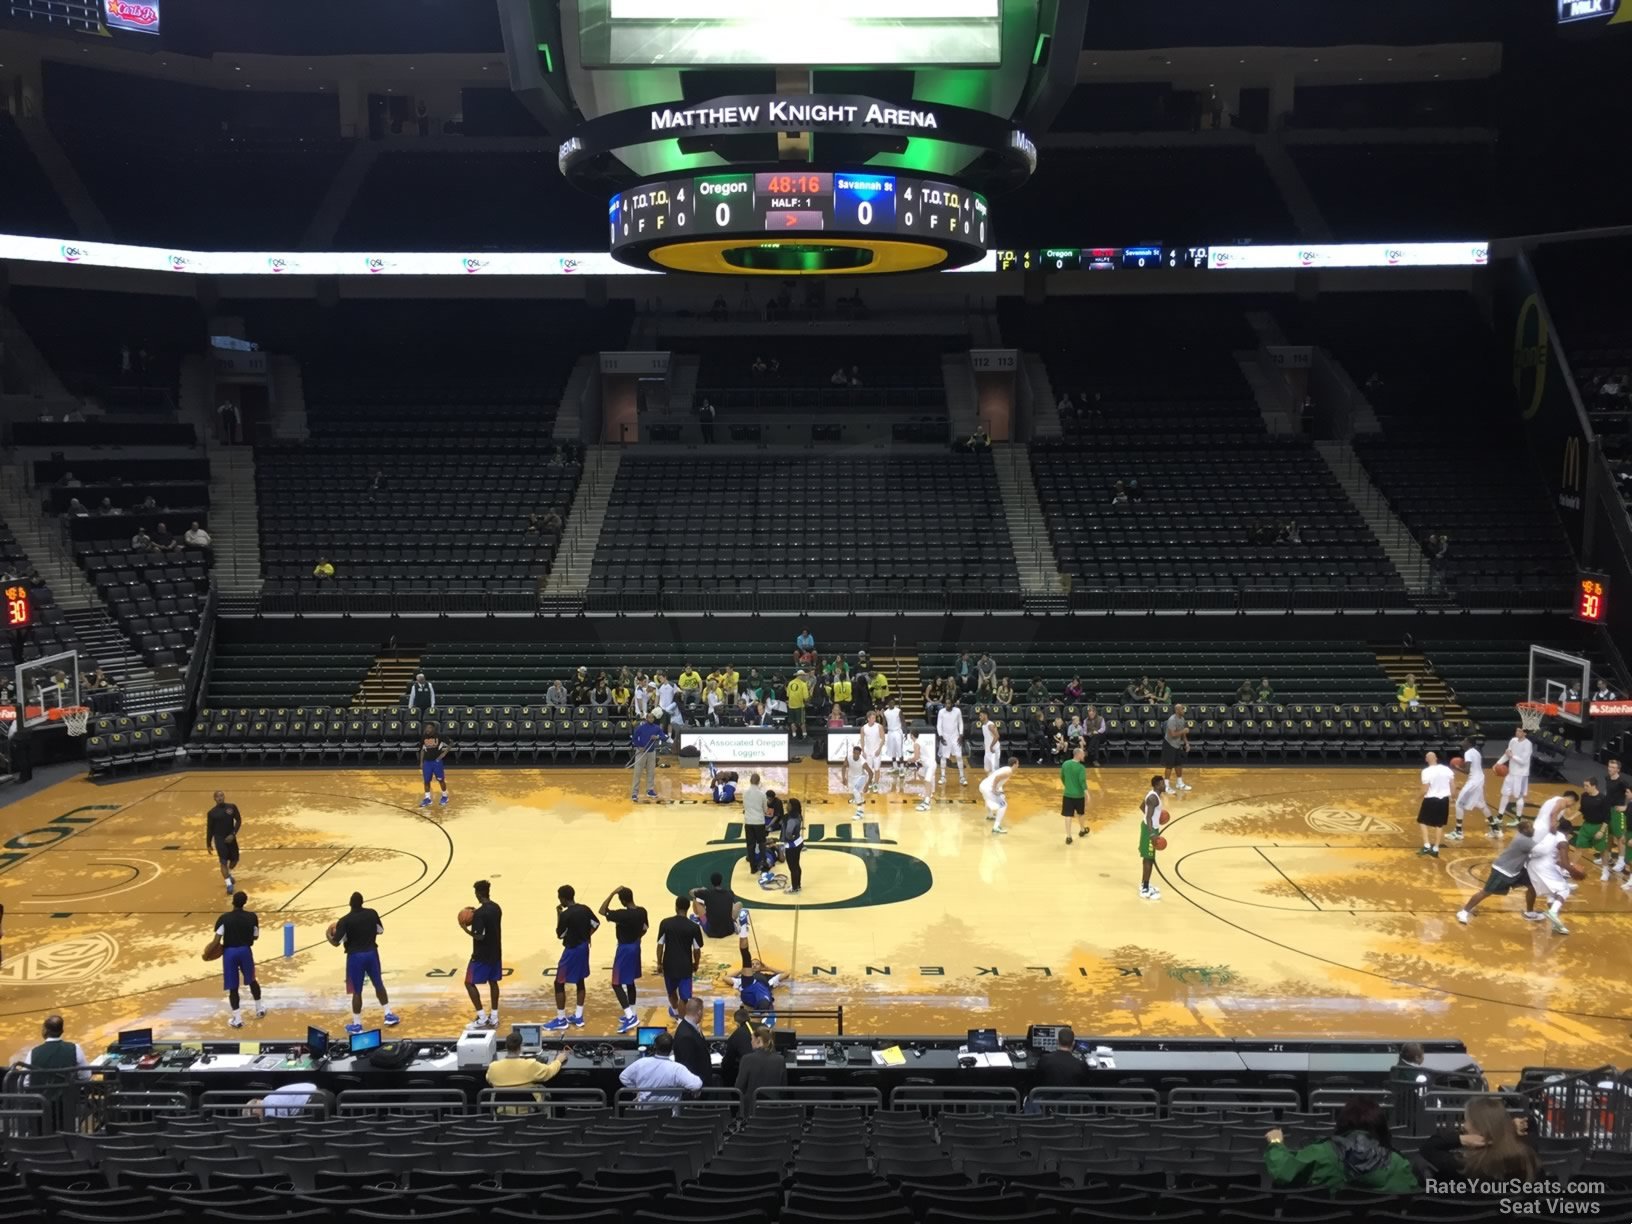 section 103, row k seat view  - matthew knight arena